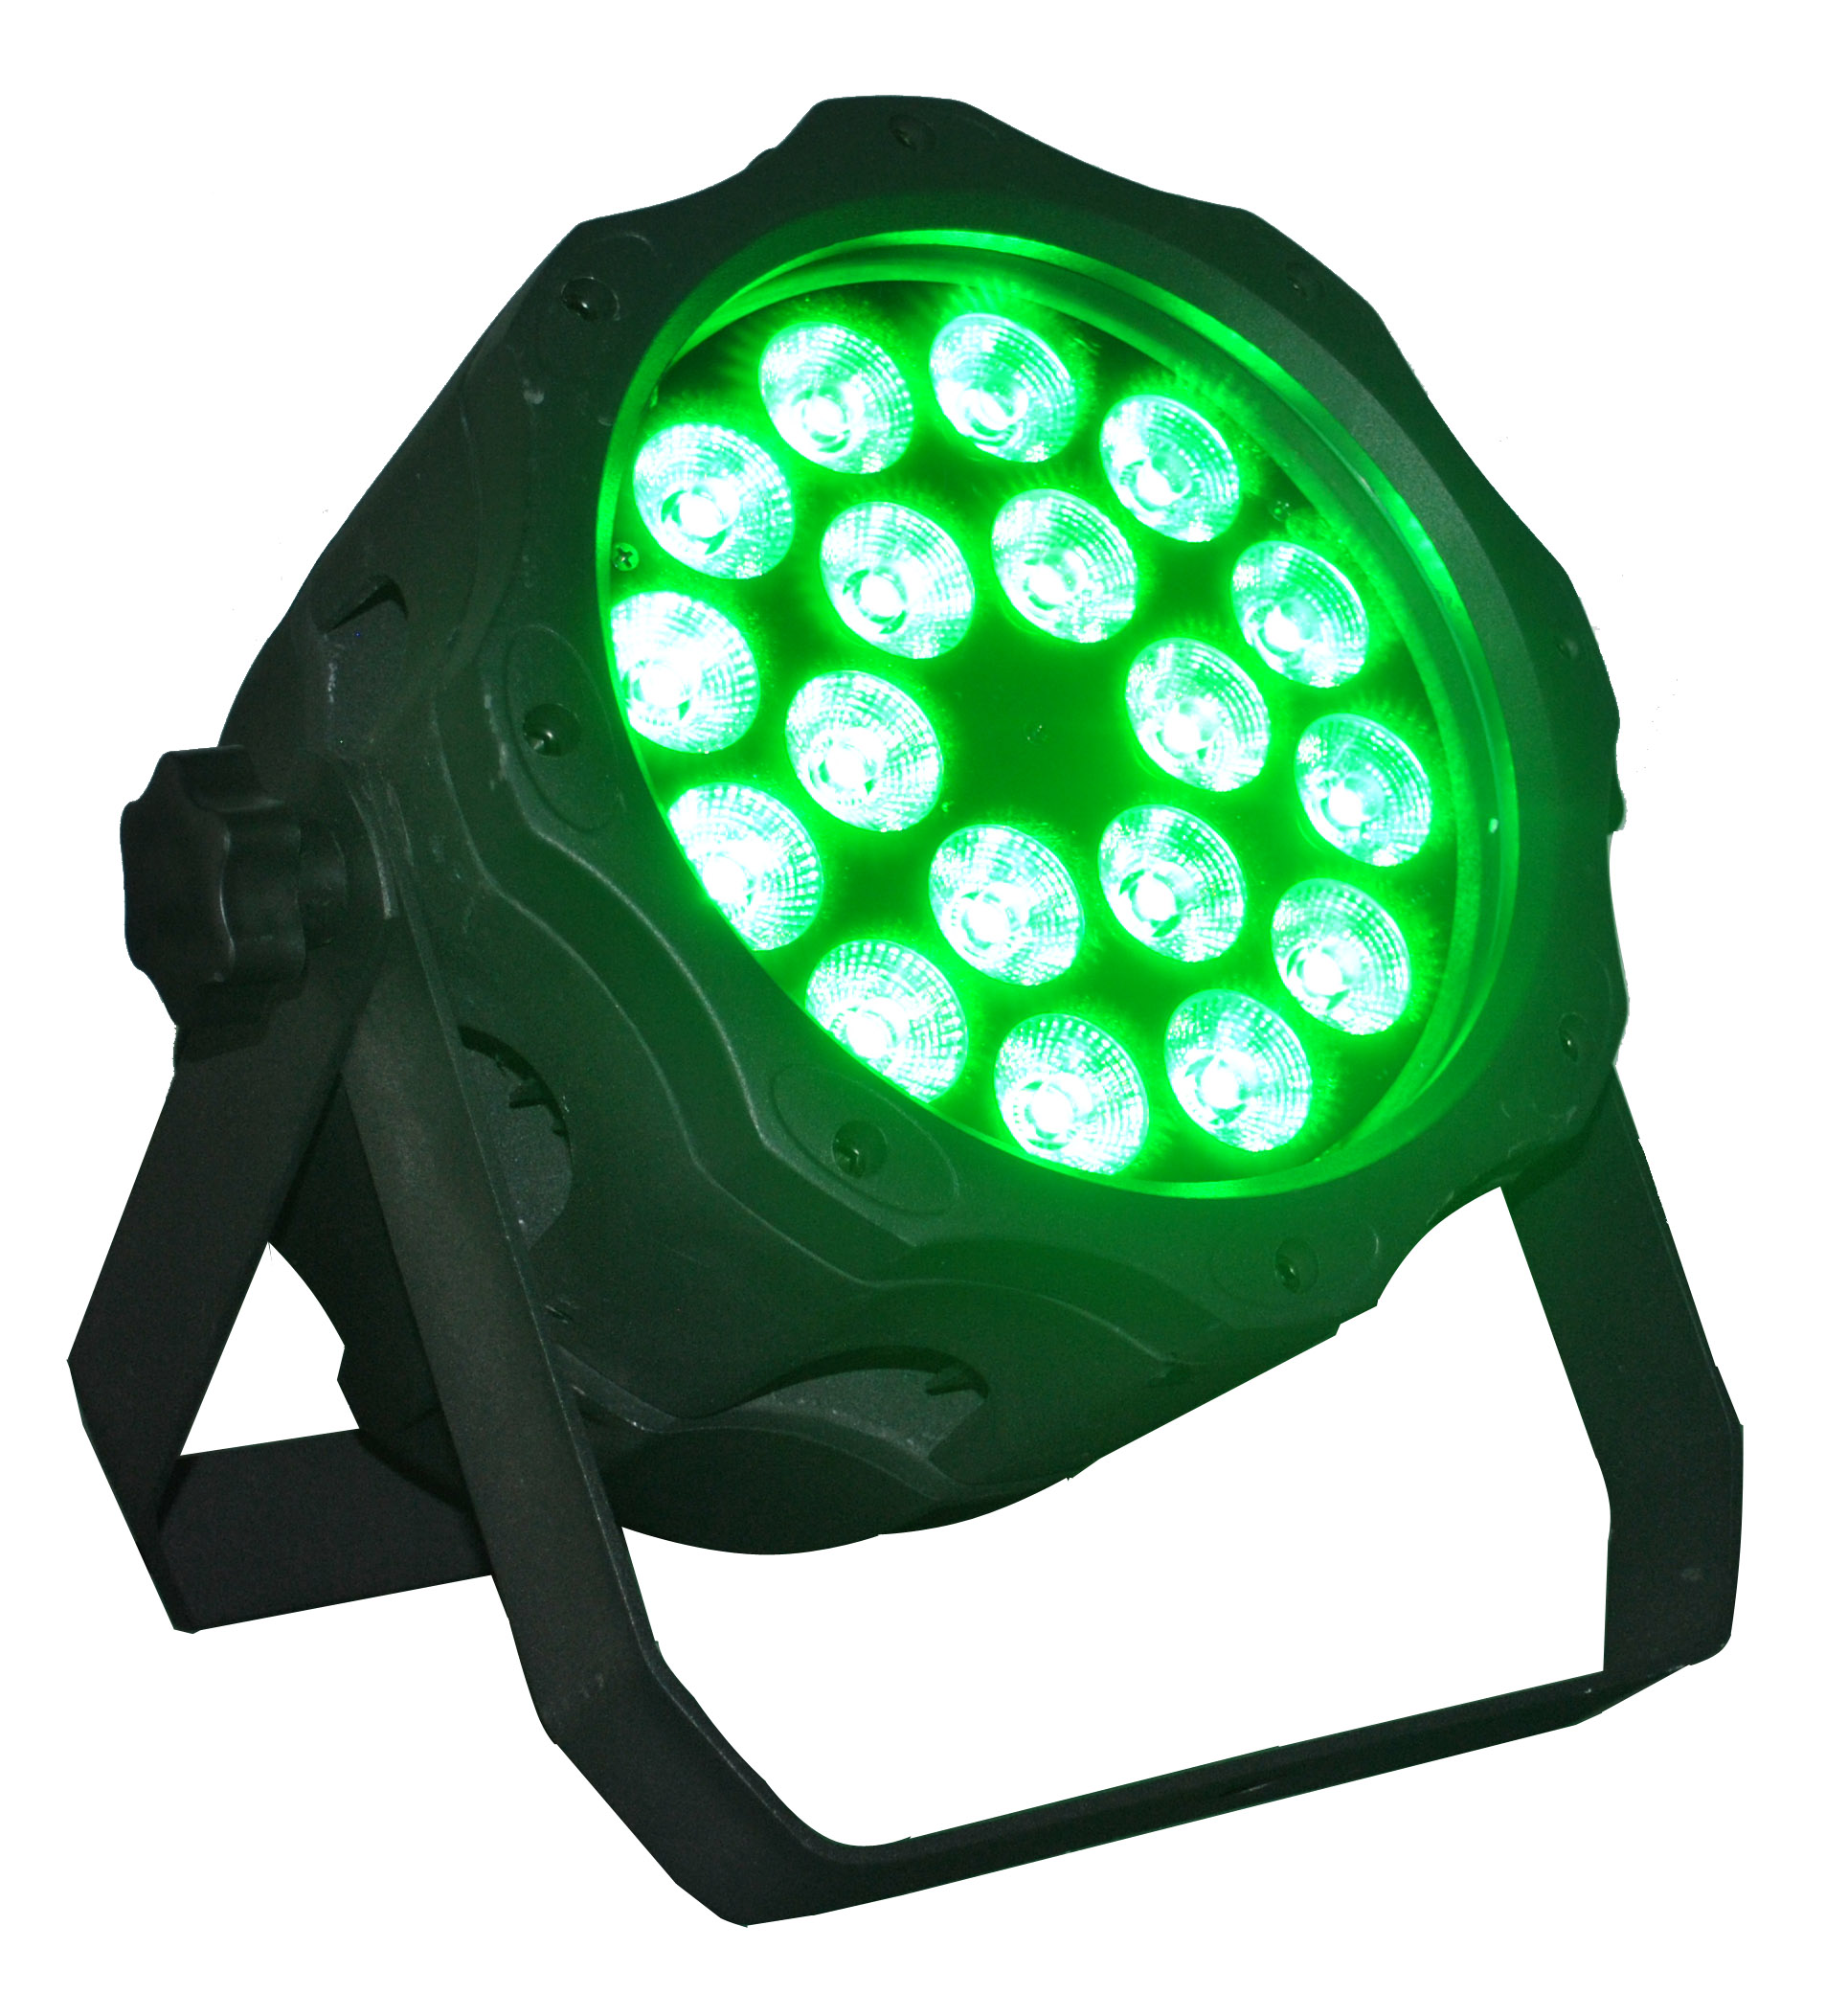 Outdoor 18X18W 6in1 Led Par Can Light HS-P64-1818Out - Led stage light - 7